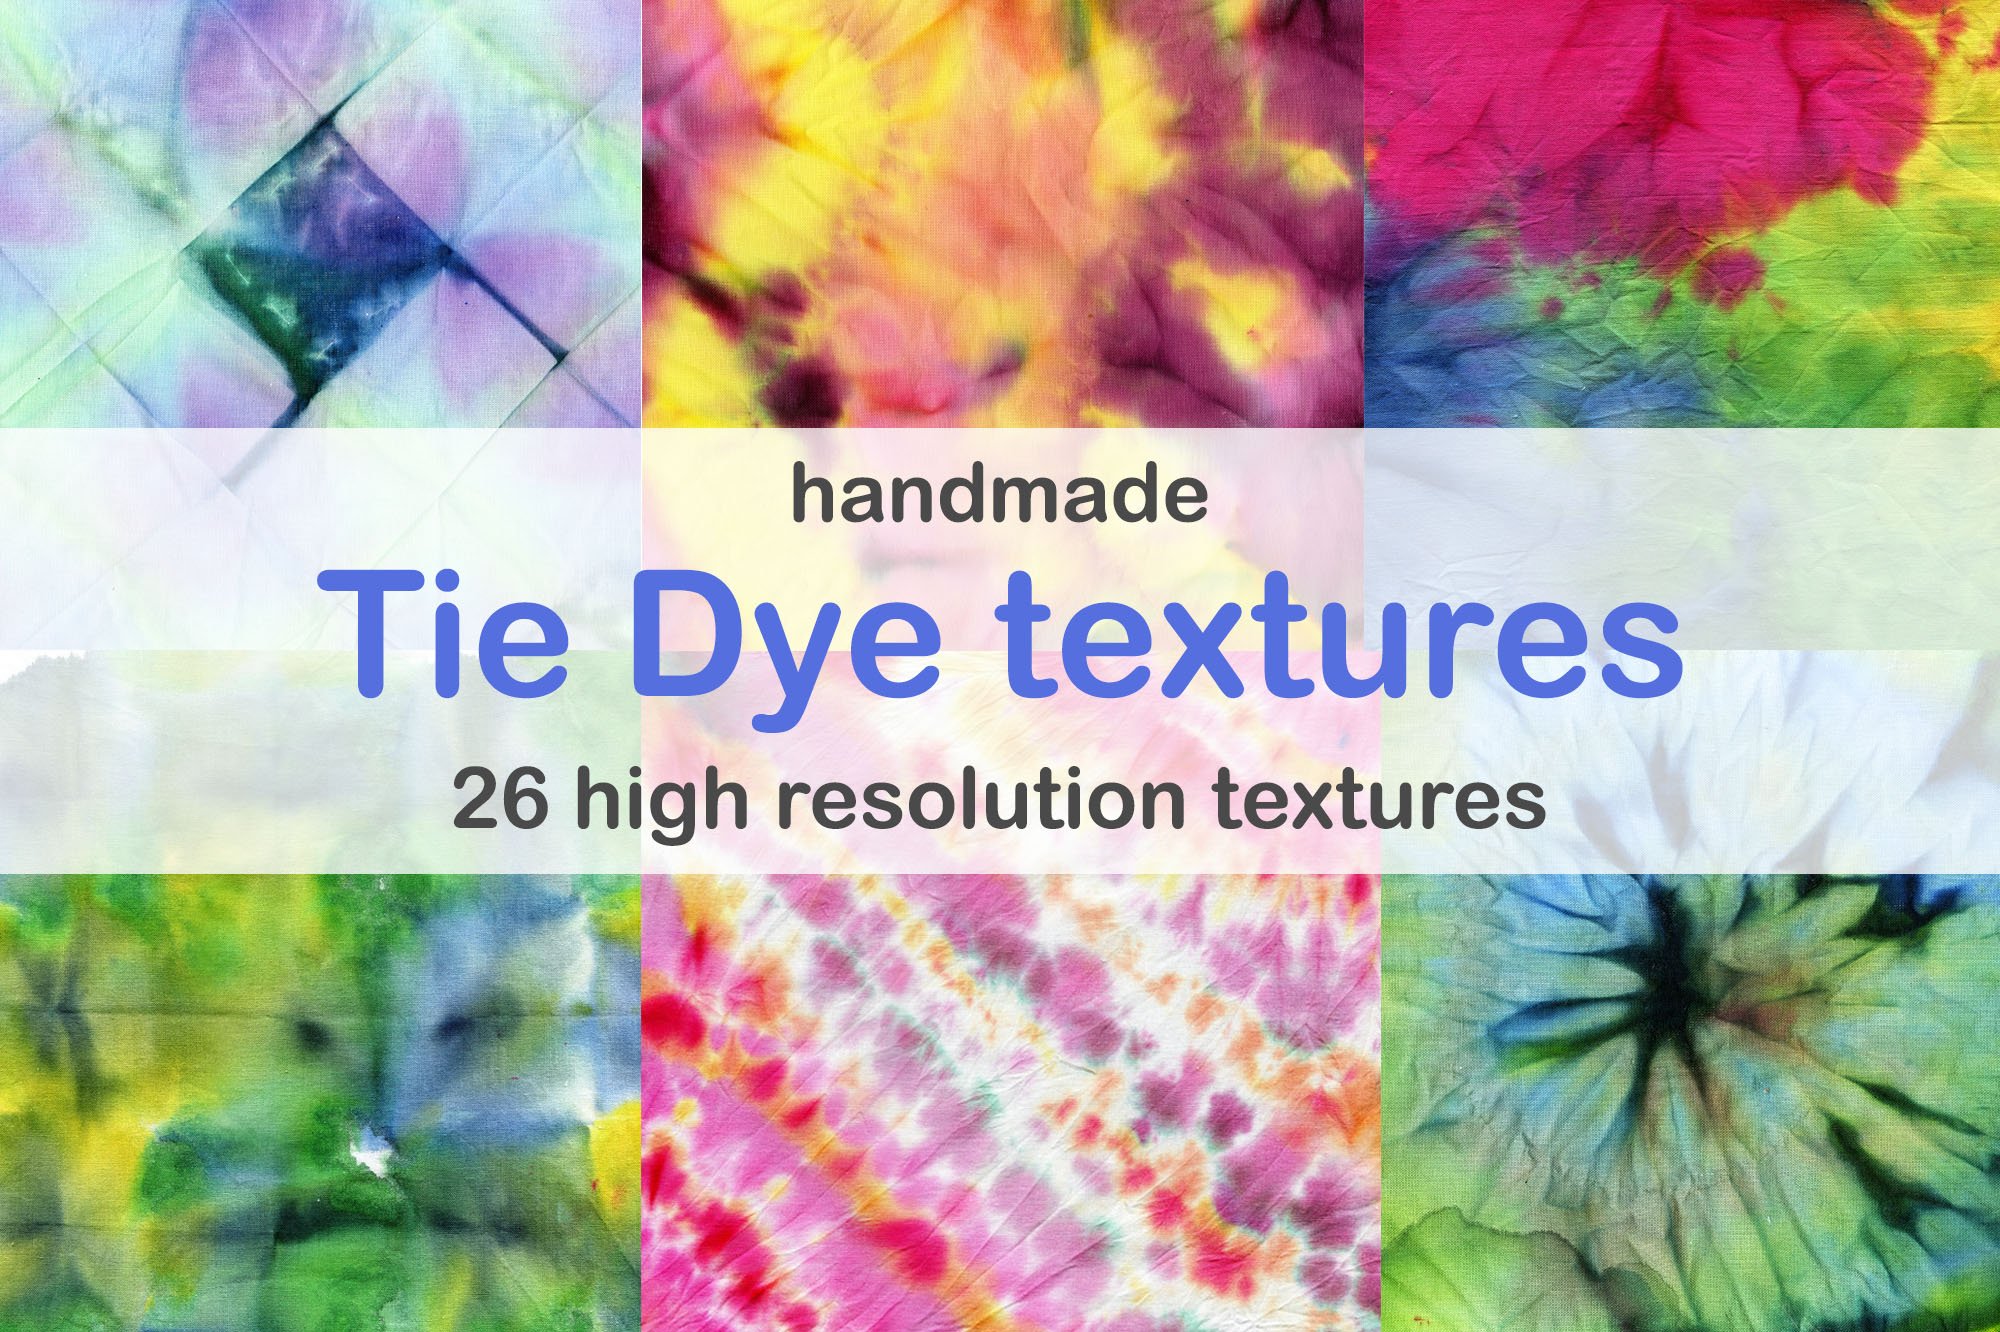 Tie Dye textures 3 cover image.